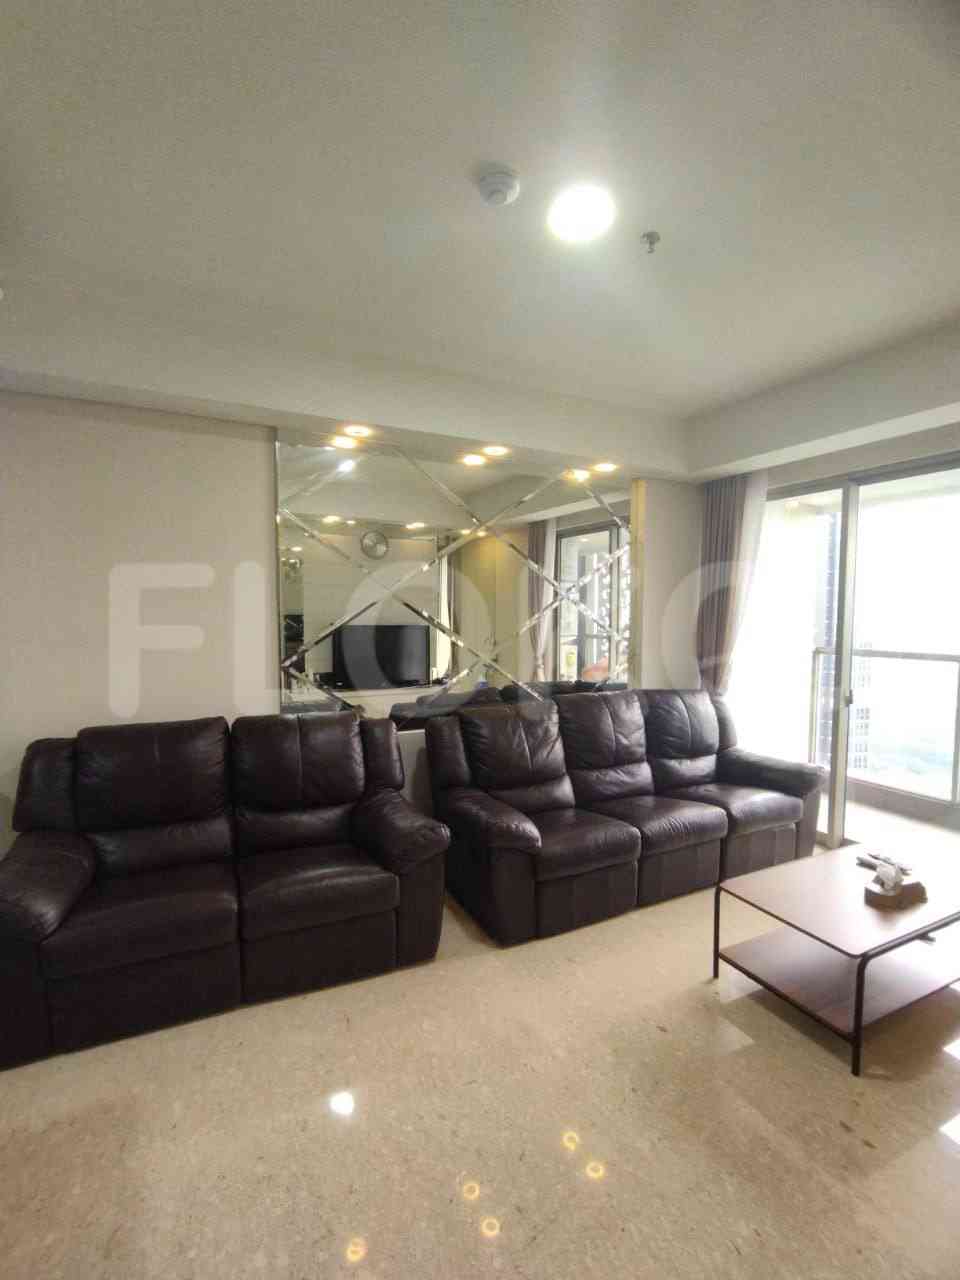 3 Bedroom on 25th Floor for Rent in Gold Coast Apartment - fka8f3 1